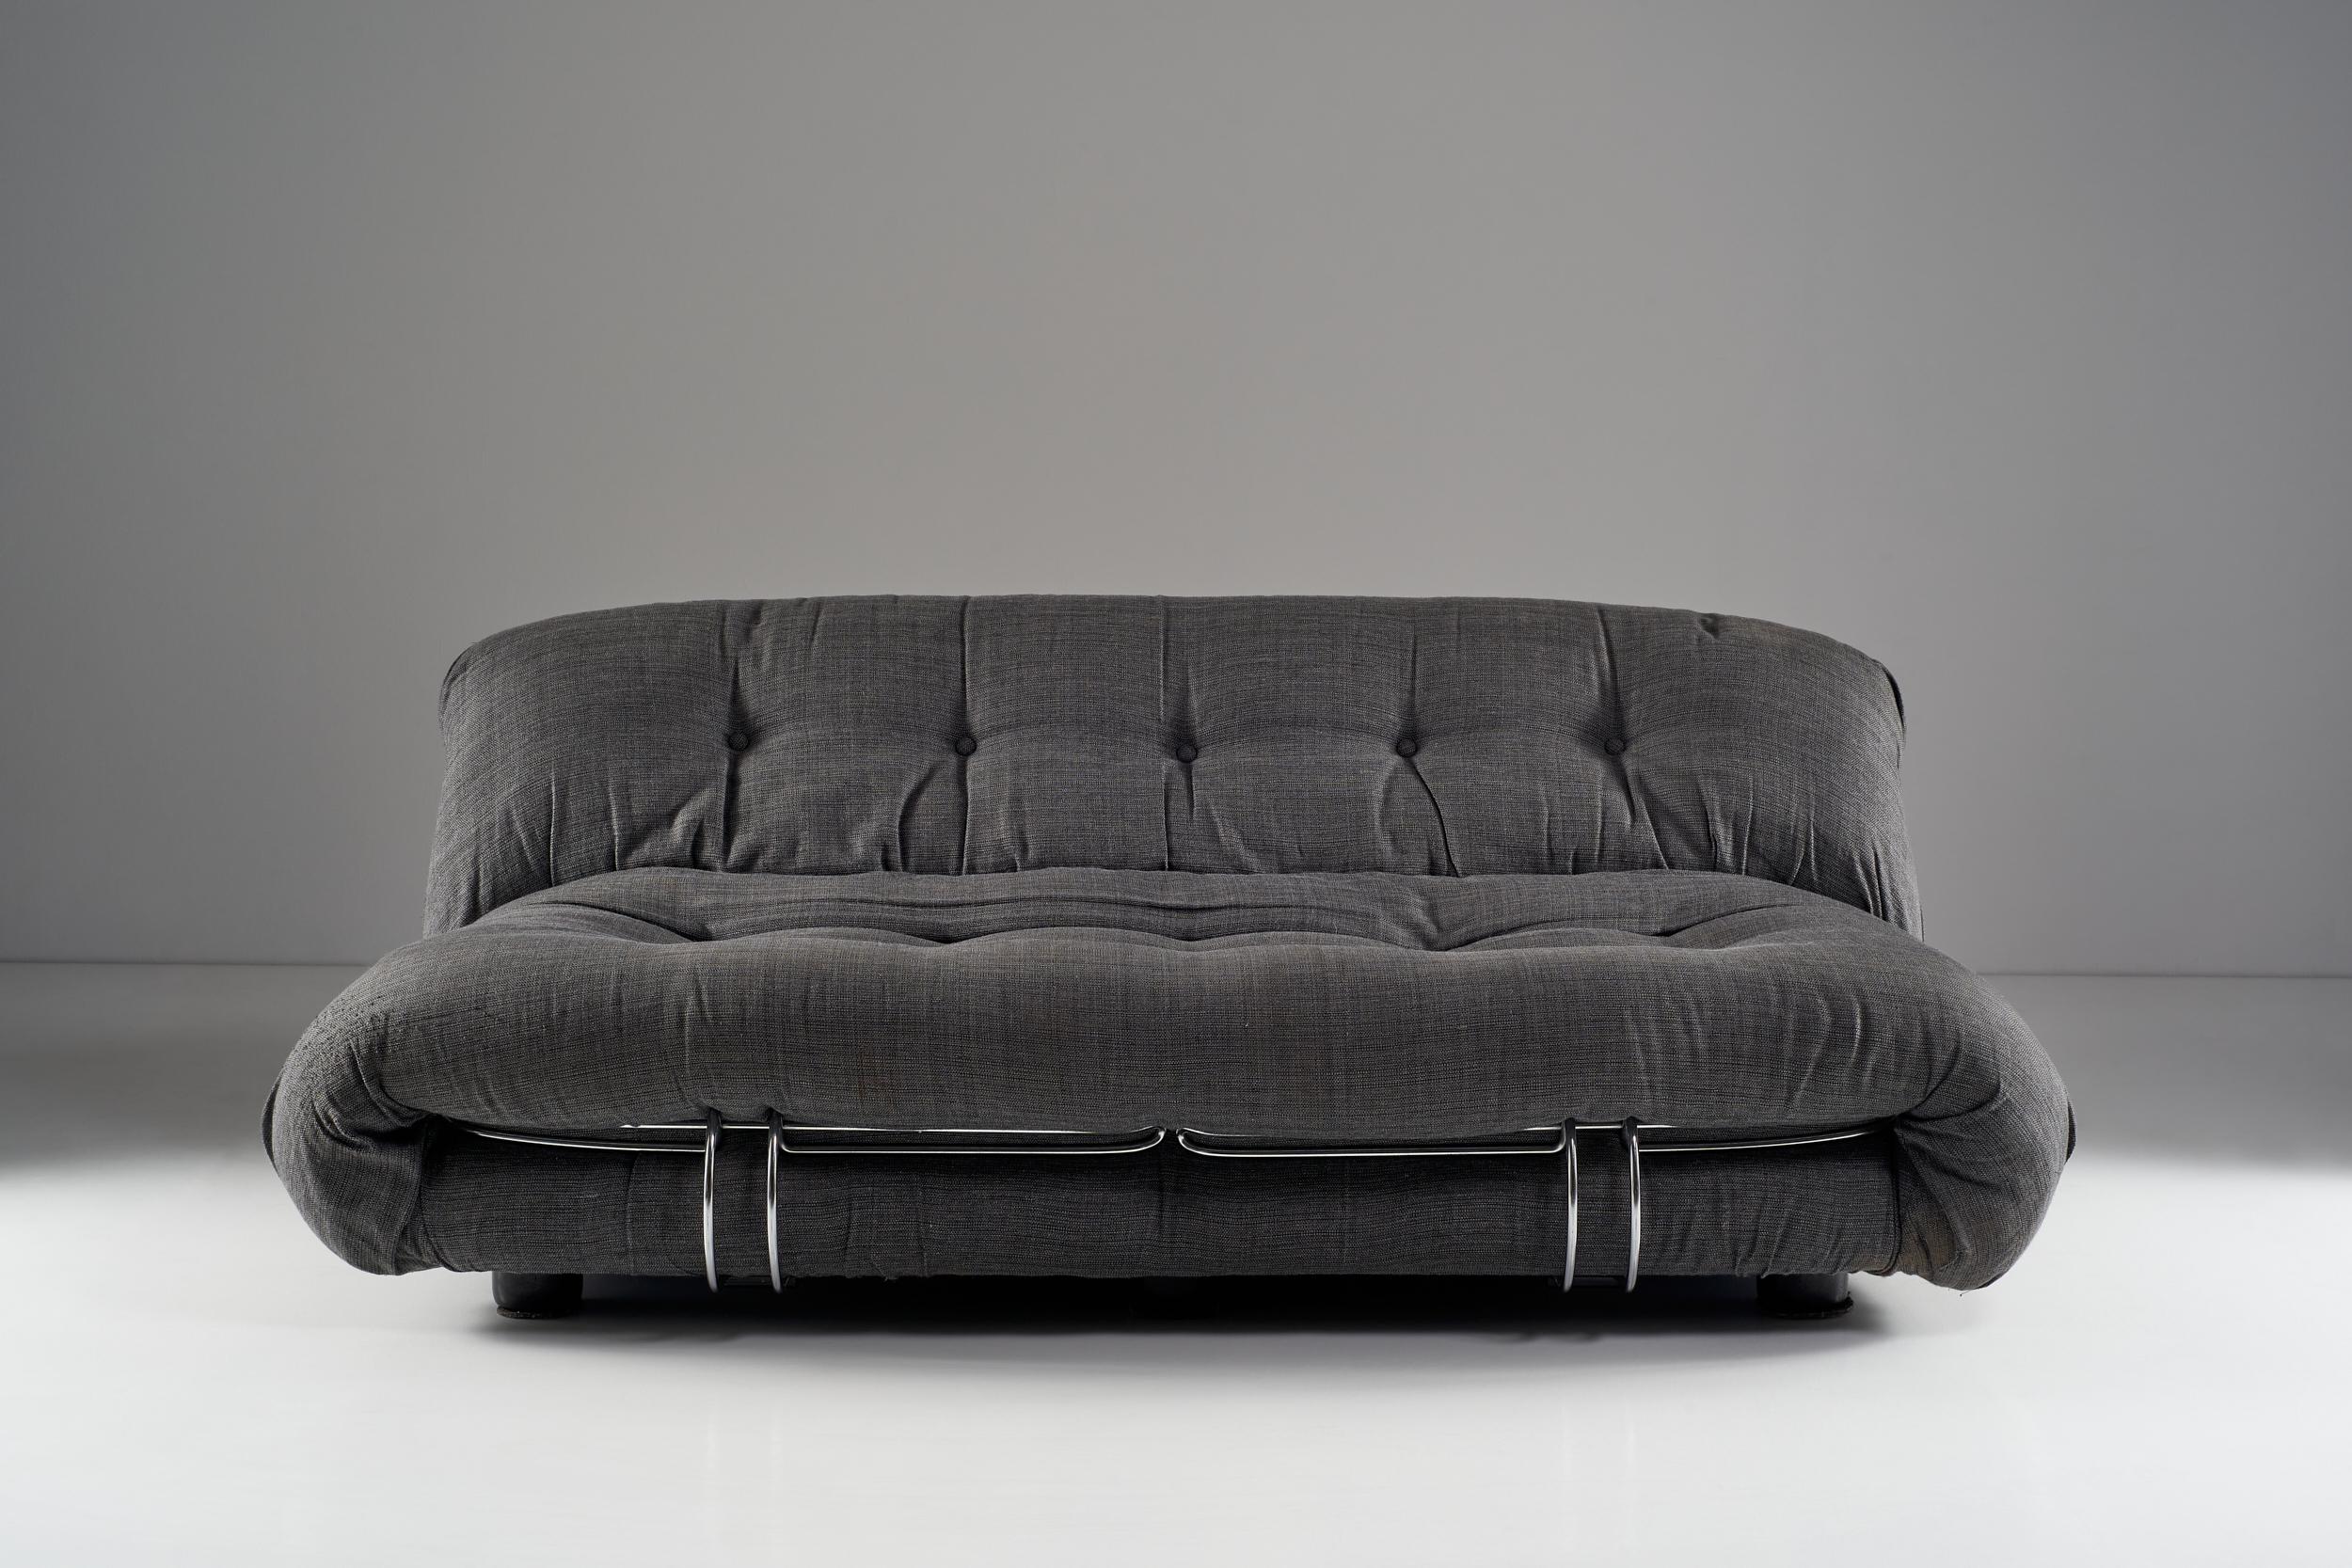 The Soriana sofa is an extremely important element of furniture. Comfort and the sofa's placid and soft shapes are kept in their laminated steel structure. The minimal and harmonious lines of the steel create a unicum between the front and the back.